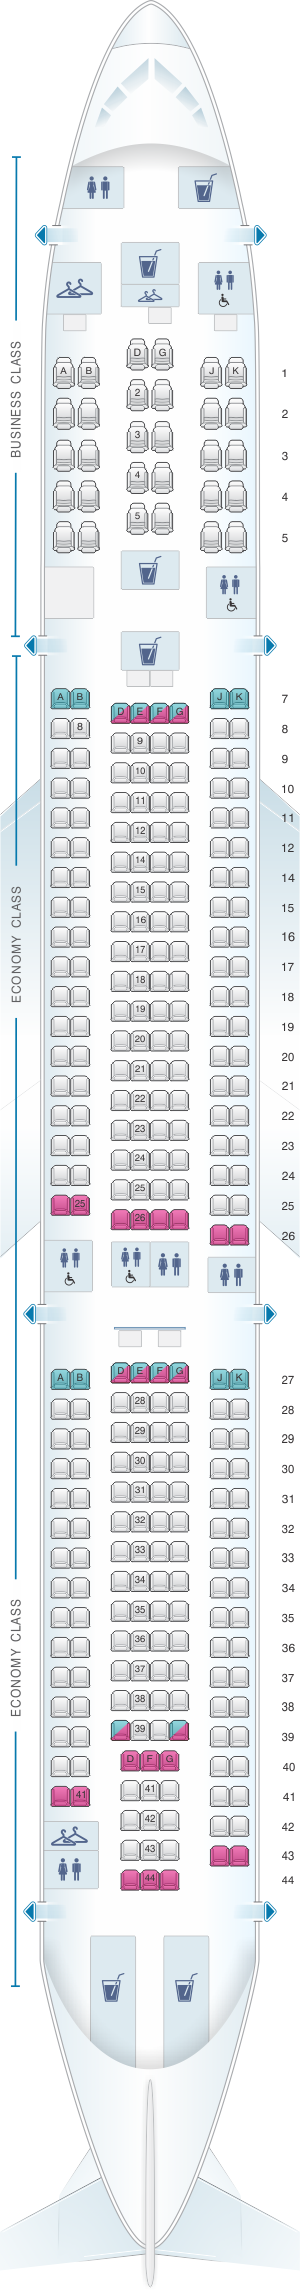 Seat map for China Airlines Airbus A330 300 Config. 1